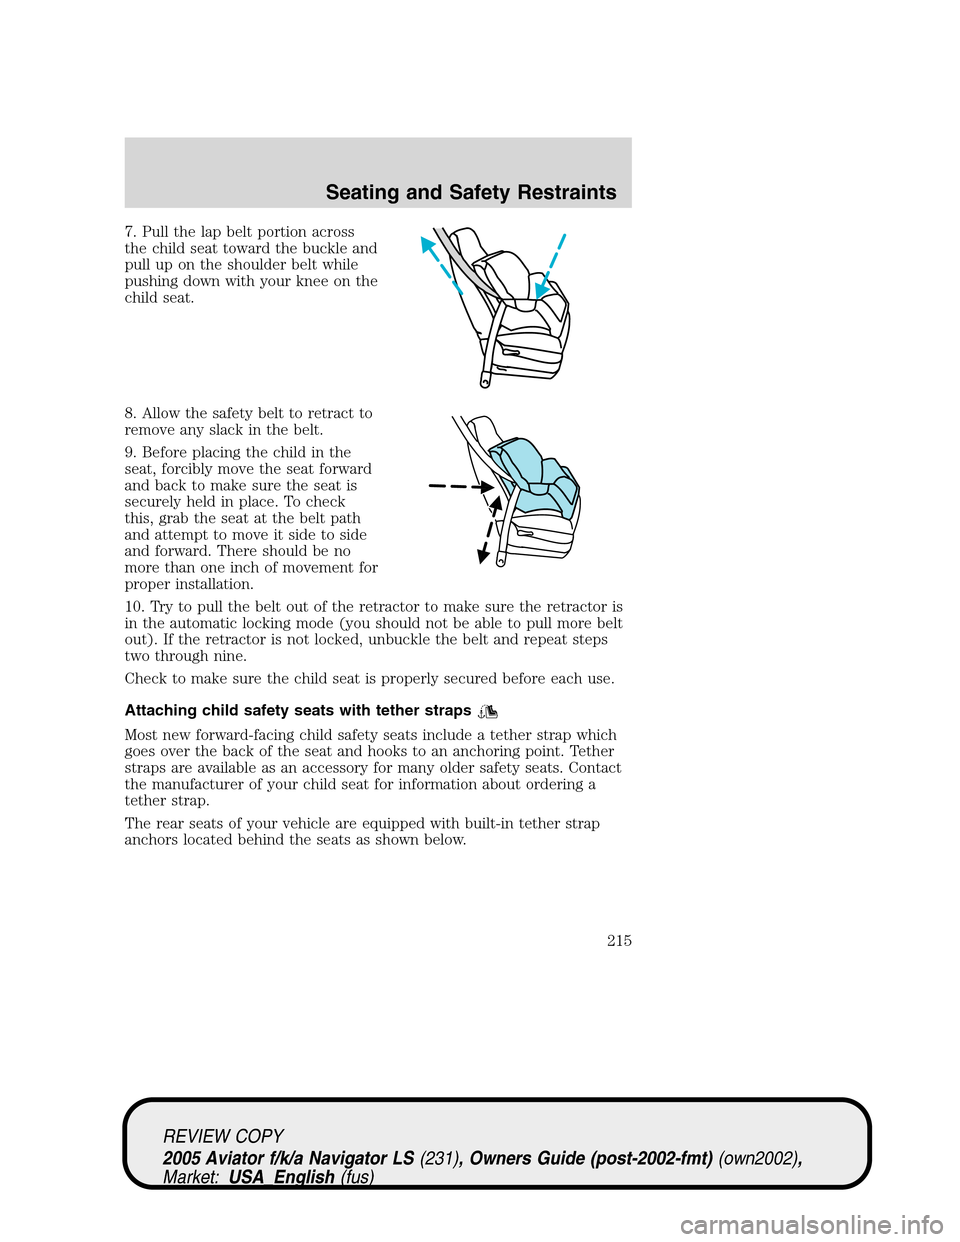 LINCOLN AVIATOR 2005 Owners Manual 7. Pull the lap belt portion across
the child seat toward the buckle and
pull up on the shoulder belt while
pushing down with your knee on the
child seat.
8. Allow the safety belt to retract to
remove